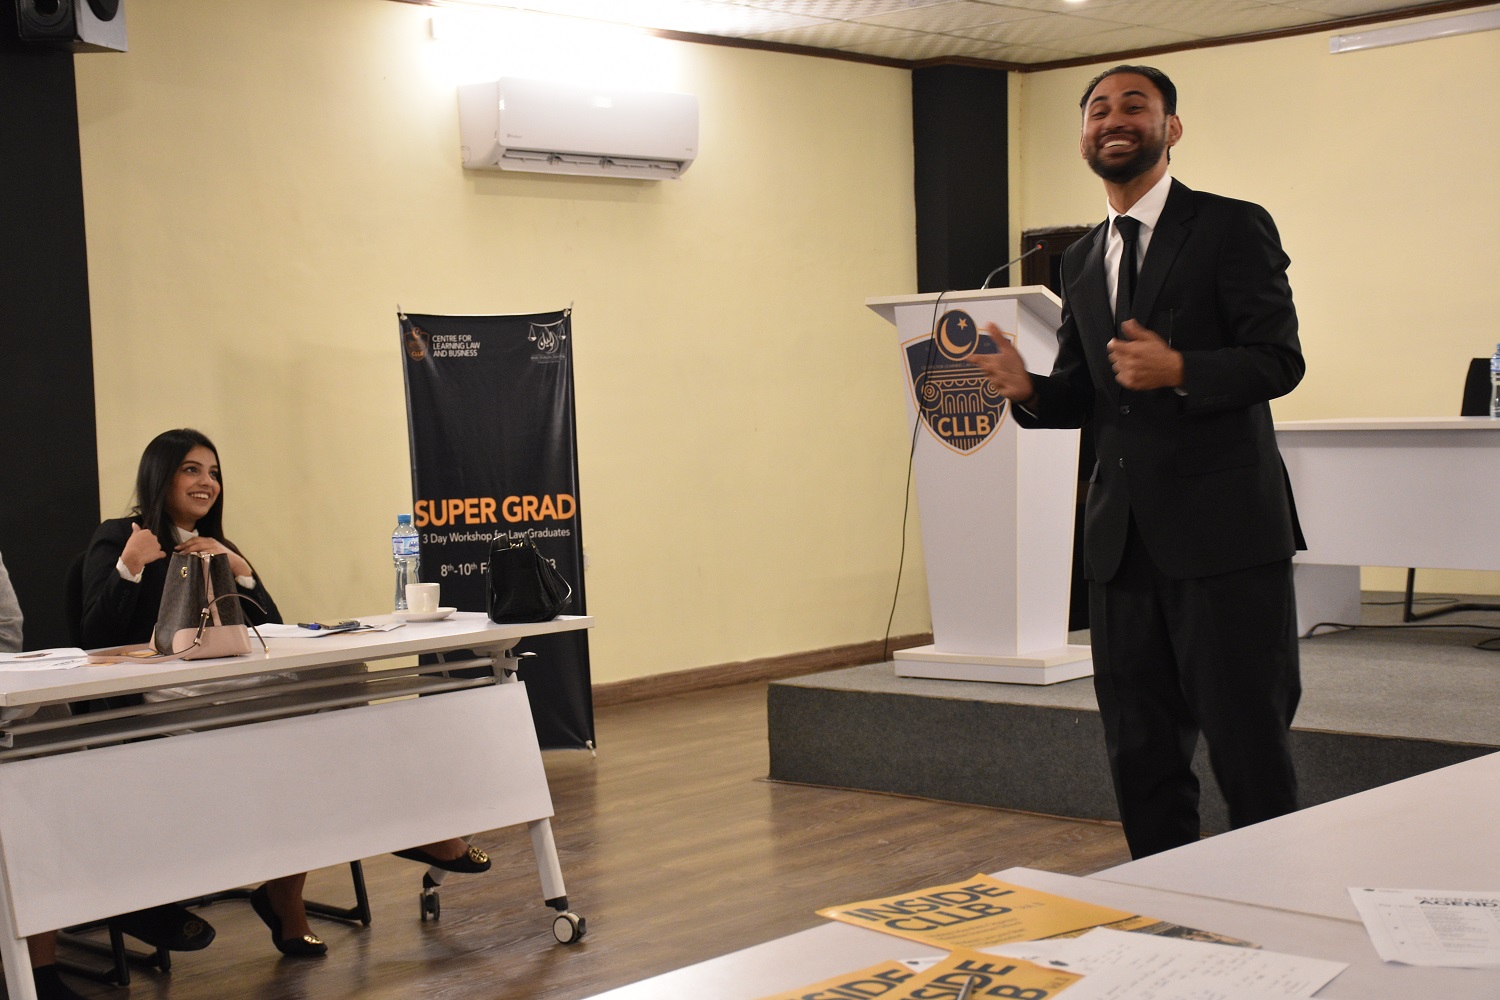 Law Society organises Super Grad for law students